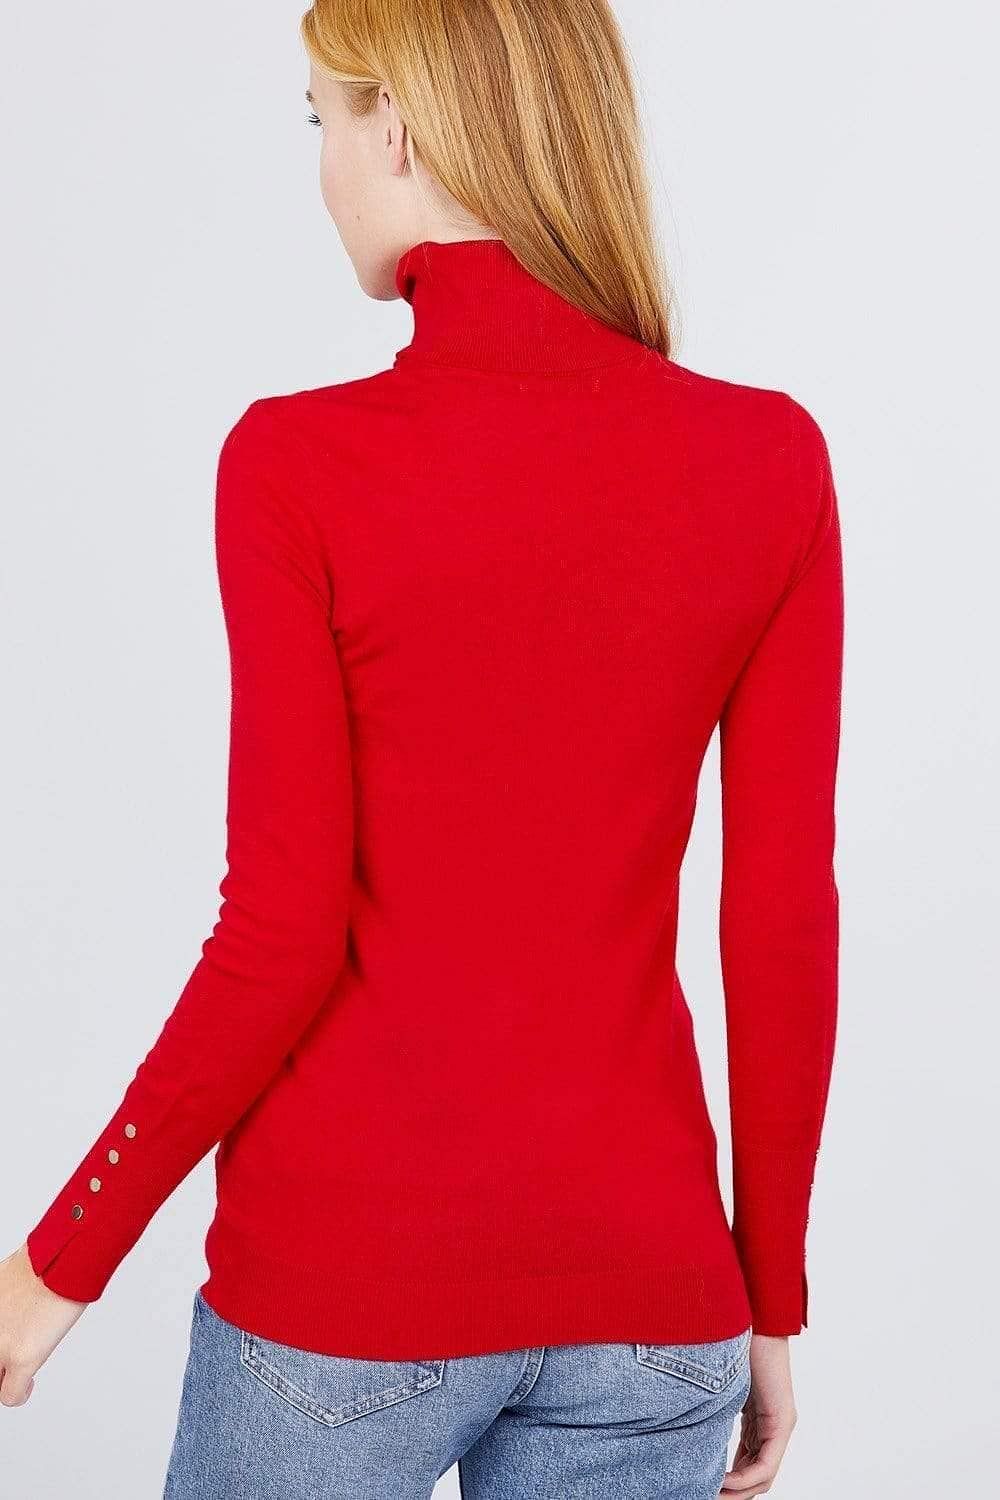 Classic Red Long Sleeve Turtleneck Sweater - Shopping Therapy, LLC Sweater